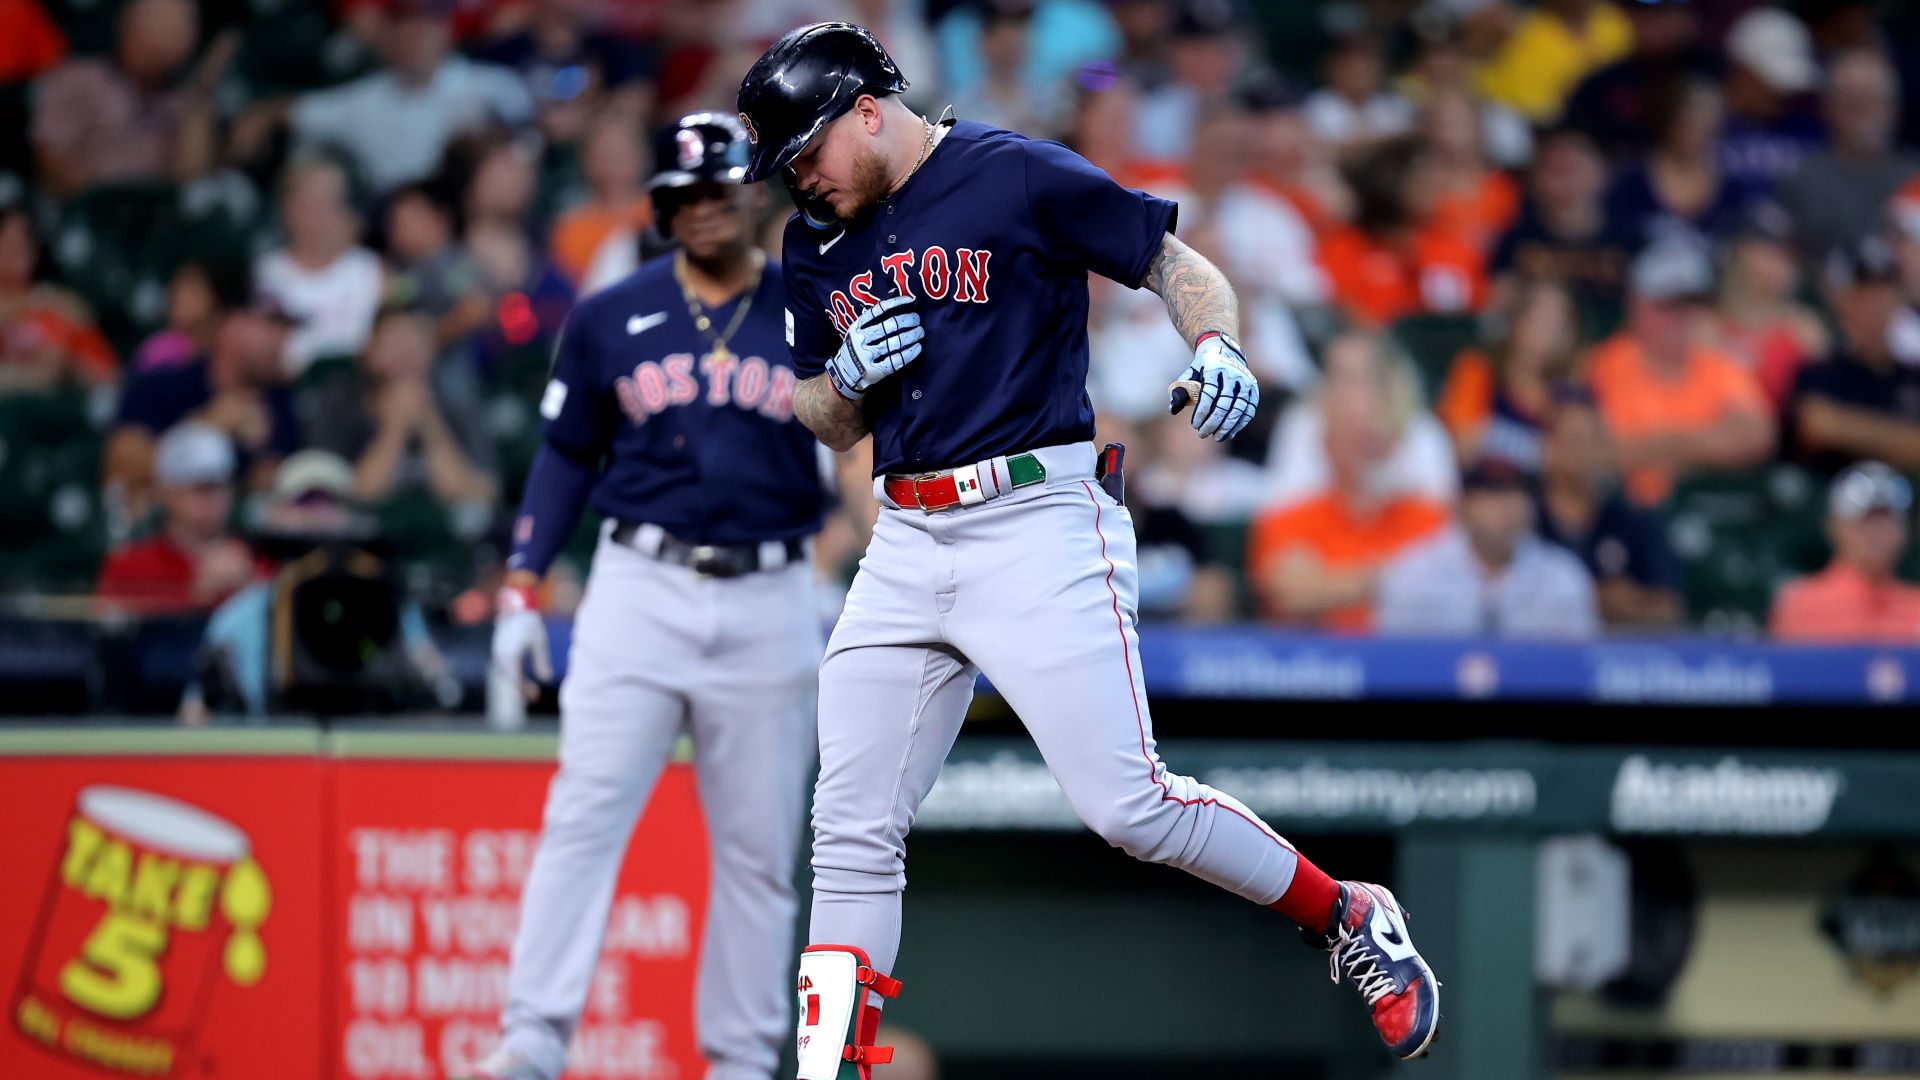 Astros 2, Red Sox 0: Lackey's solid start wasted as Boston bats fall silent